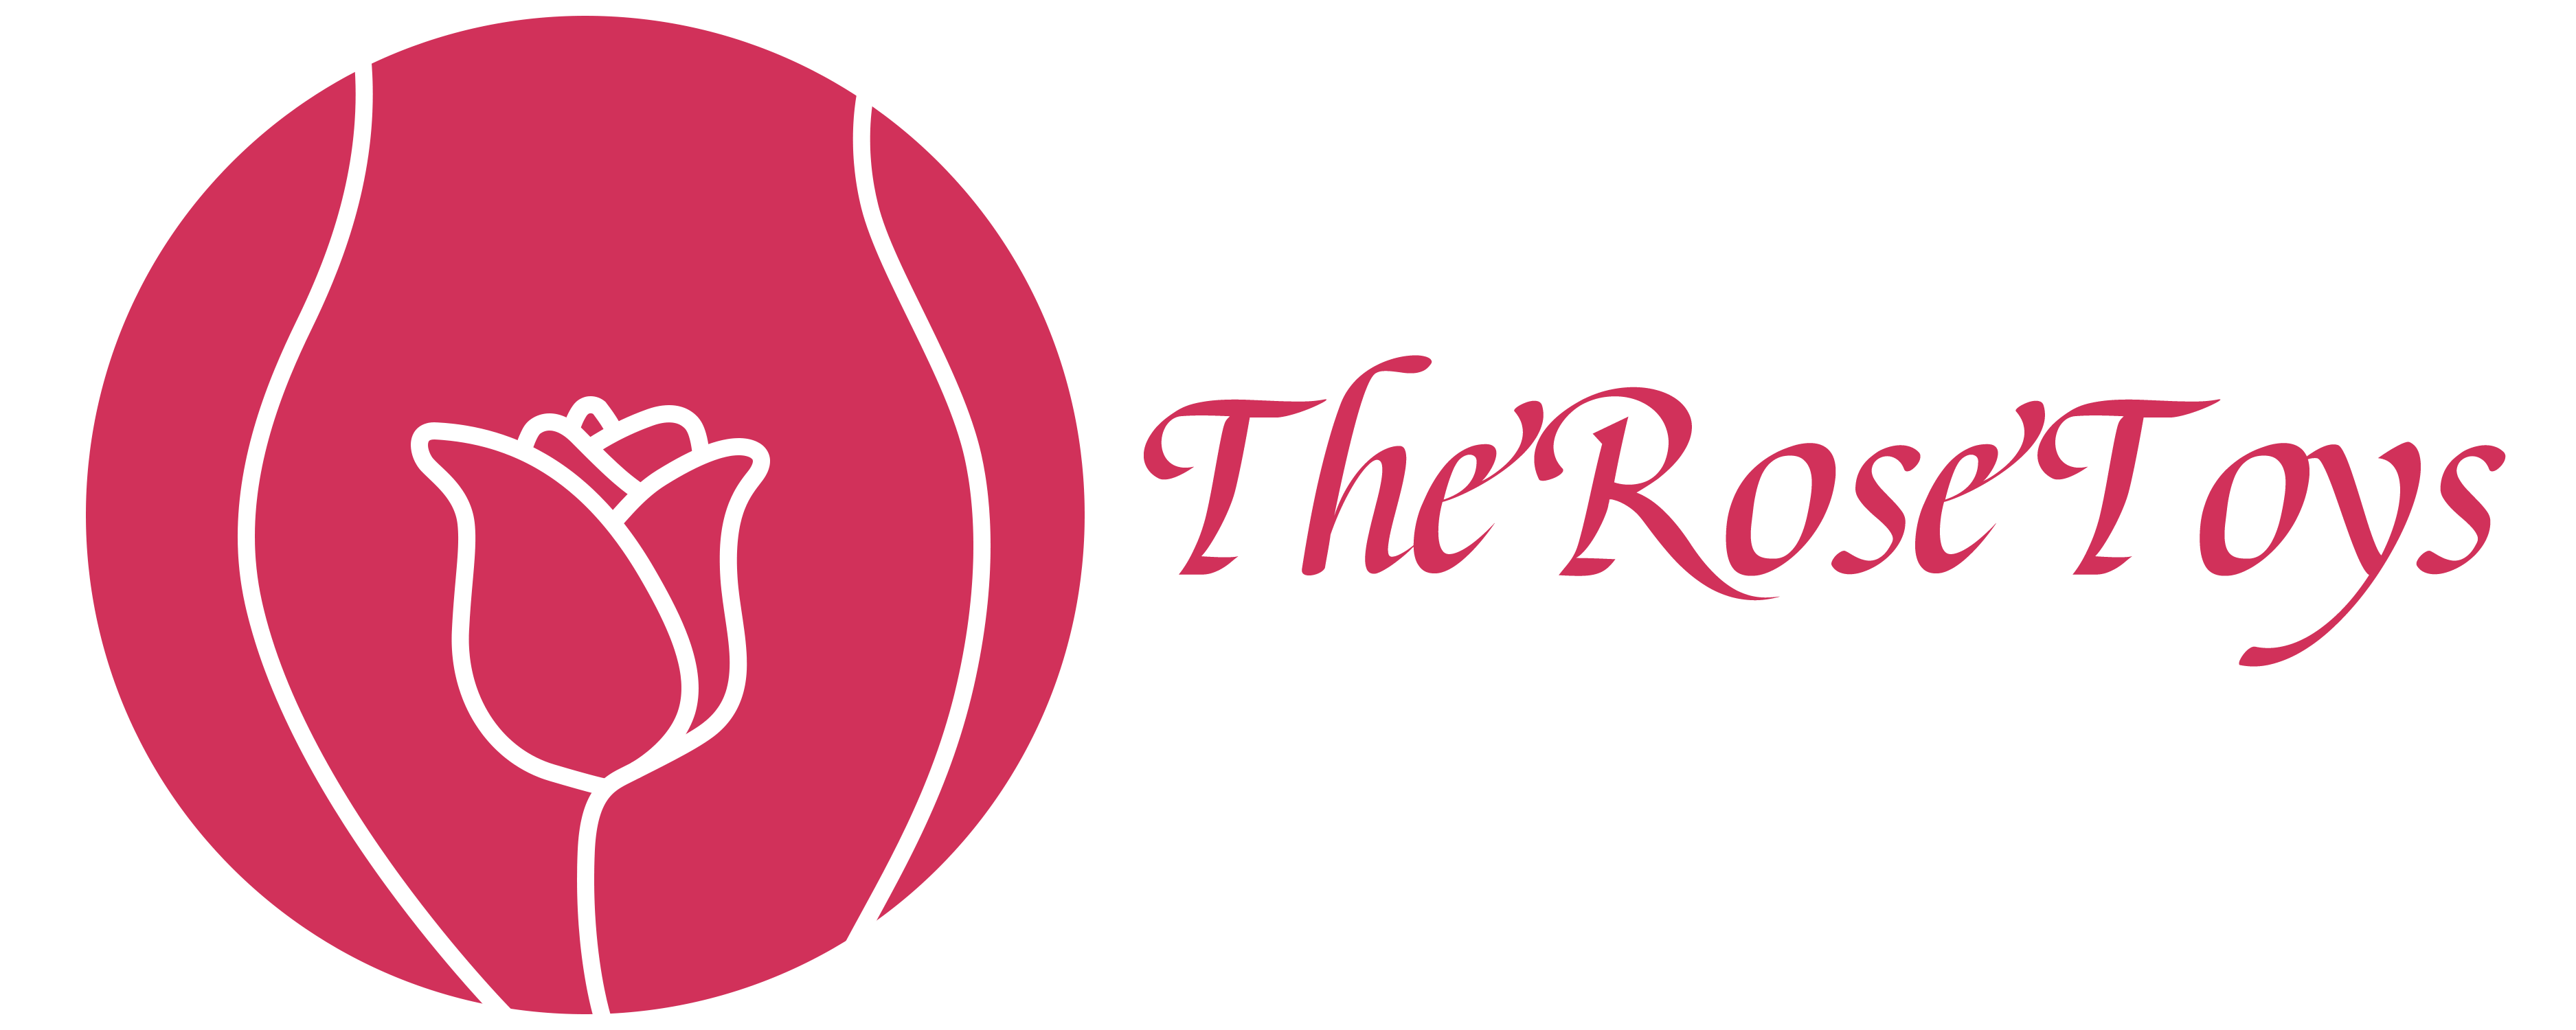 The Rose Toys